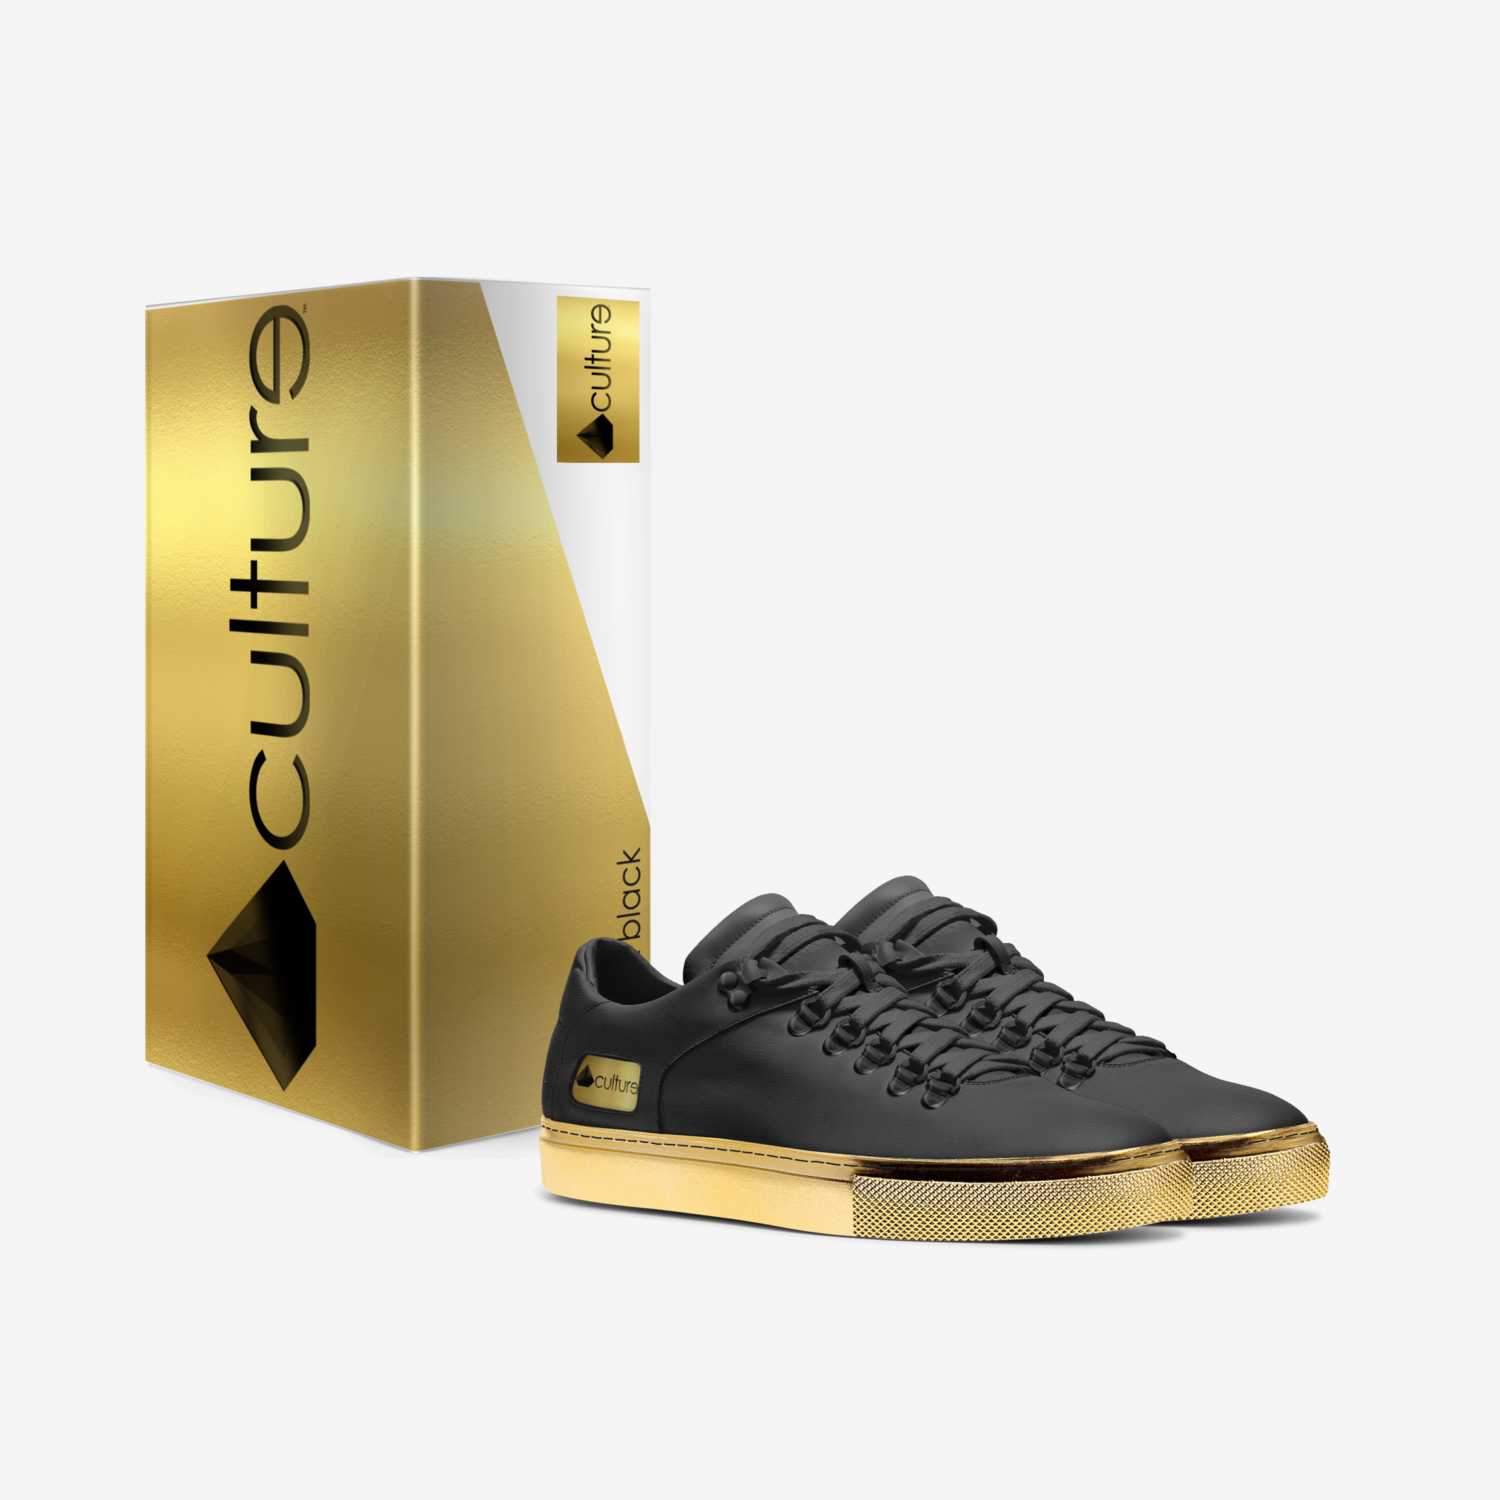 Black & Gold X custom made in Italy shoes by Edward Griffin | Box view